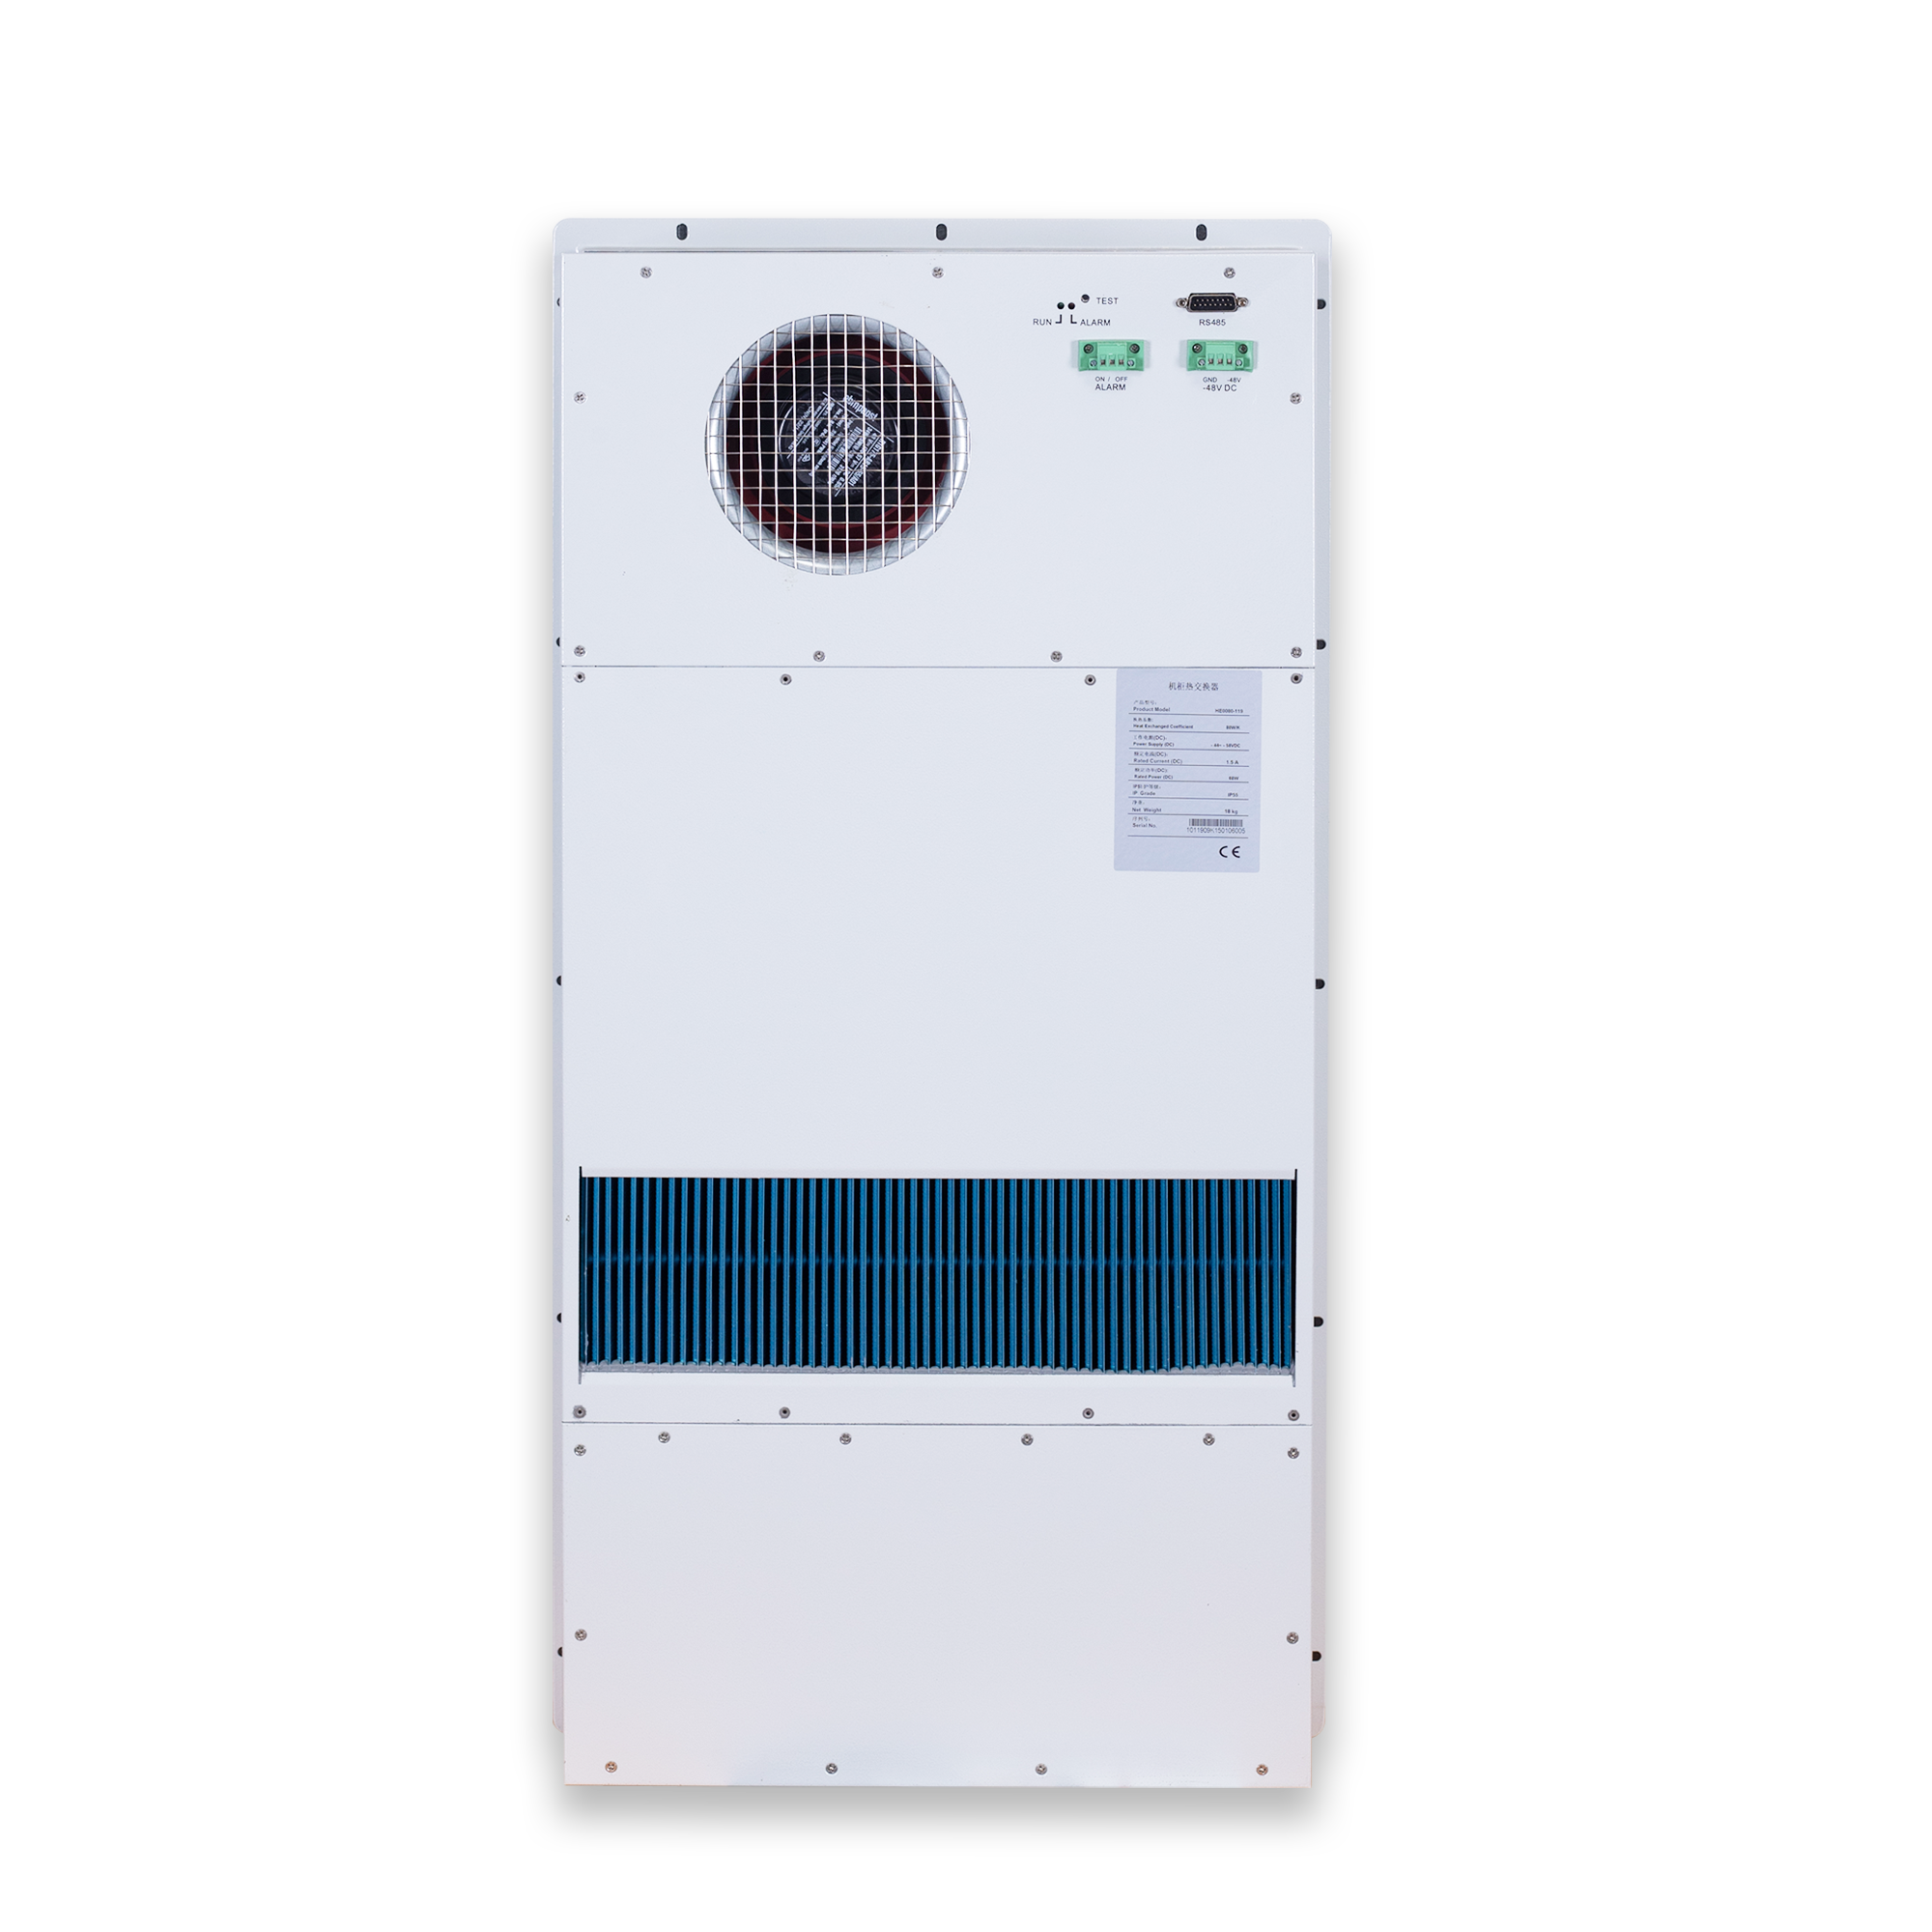 DC Powered Heat Exchanger for Telecom Cabinet